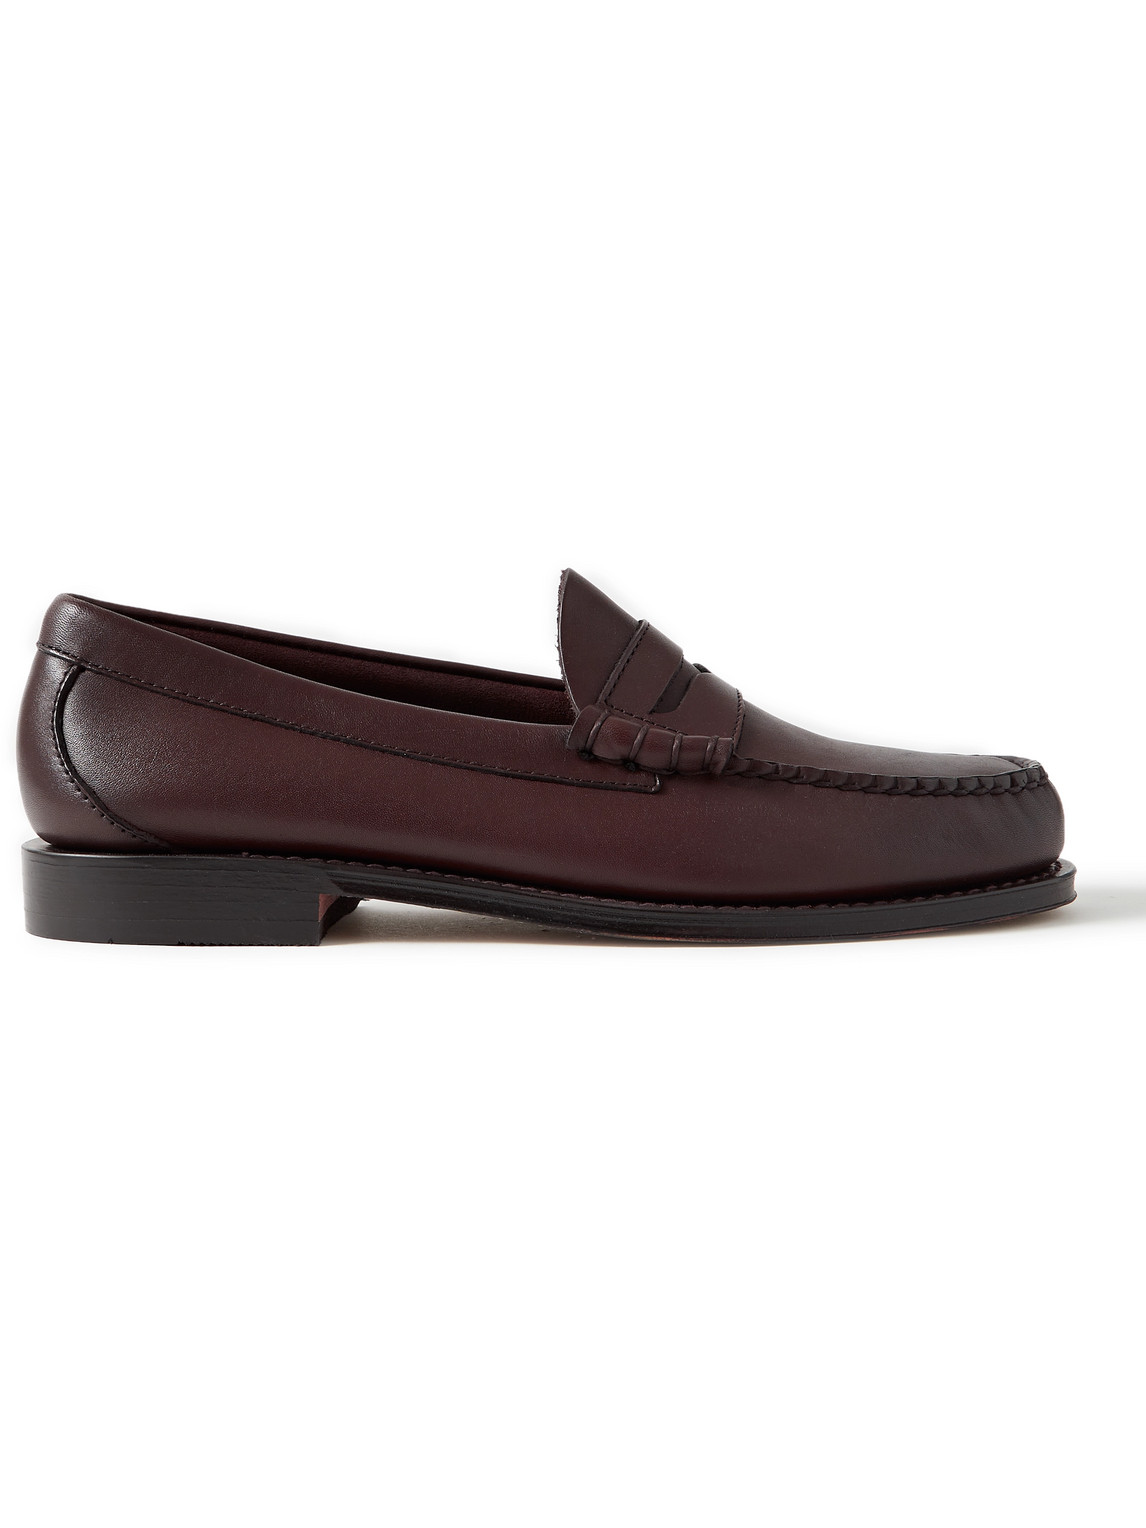 G.H. Bass & Co. - Weejuns Heritage Larson Leather Penny Loafers - Men - Brown - UK 5 von G.H. Bass & Co.